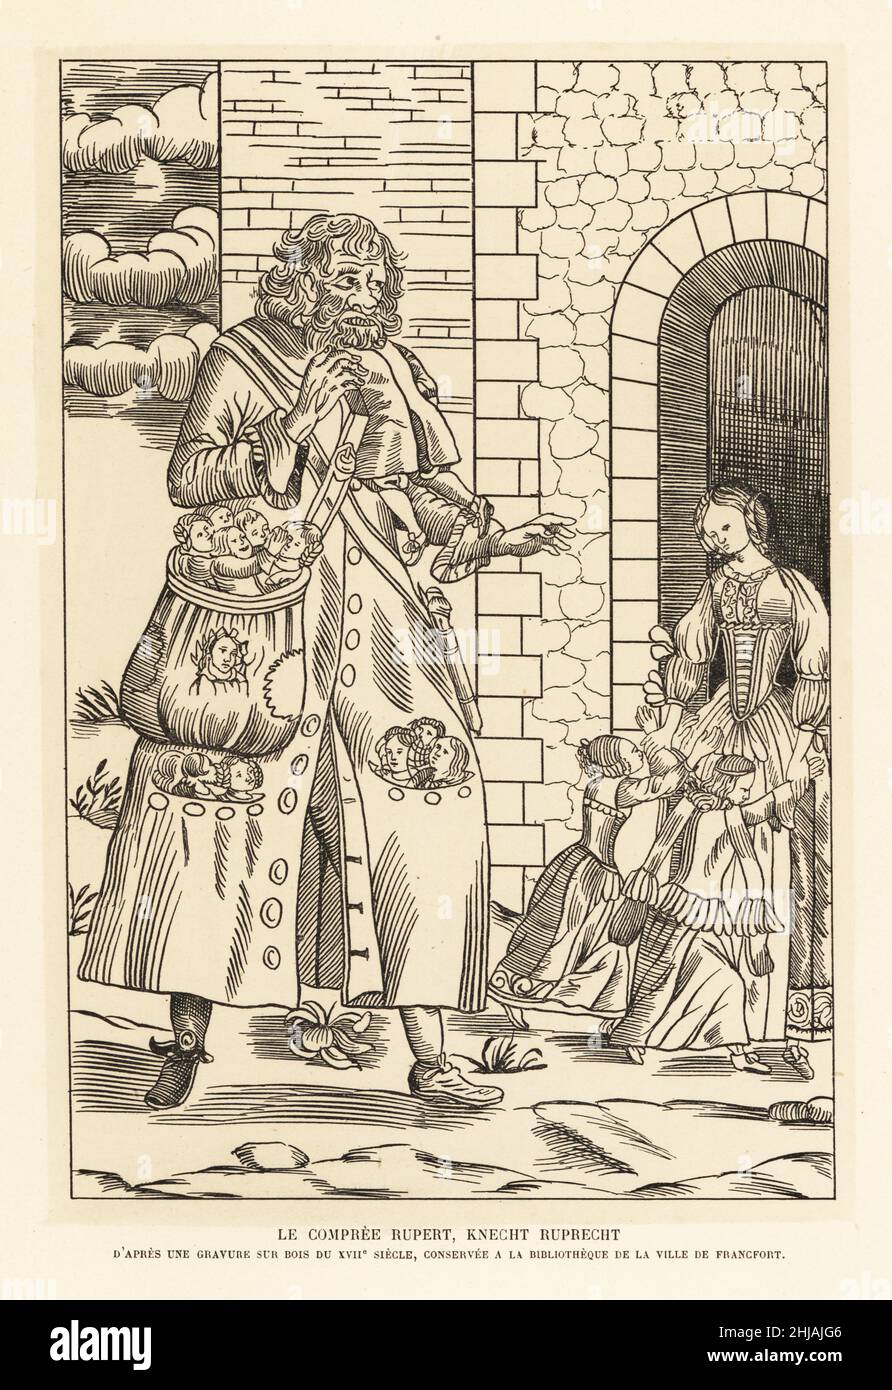 Knecht Ruprecht, or Hans Ruprecht, manservant to Saint Nicholas in German folklore and figure in a Nuremberg Christmas procession. The pockets of his long coat are filled with children. He appears in Le Compree Rupert, Knecht Ruprecht. Apres une gravure sur bois du XVIIe siecle. Lithograph after a 17th-century woodcut from Henry Rene d’Allemagne’s Recreations et Passe-Temps, Games and Pastimes, Hachette, Paris, 1906. Stock Photo